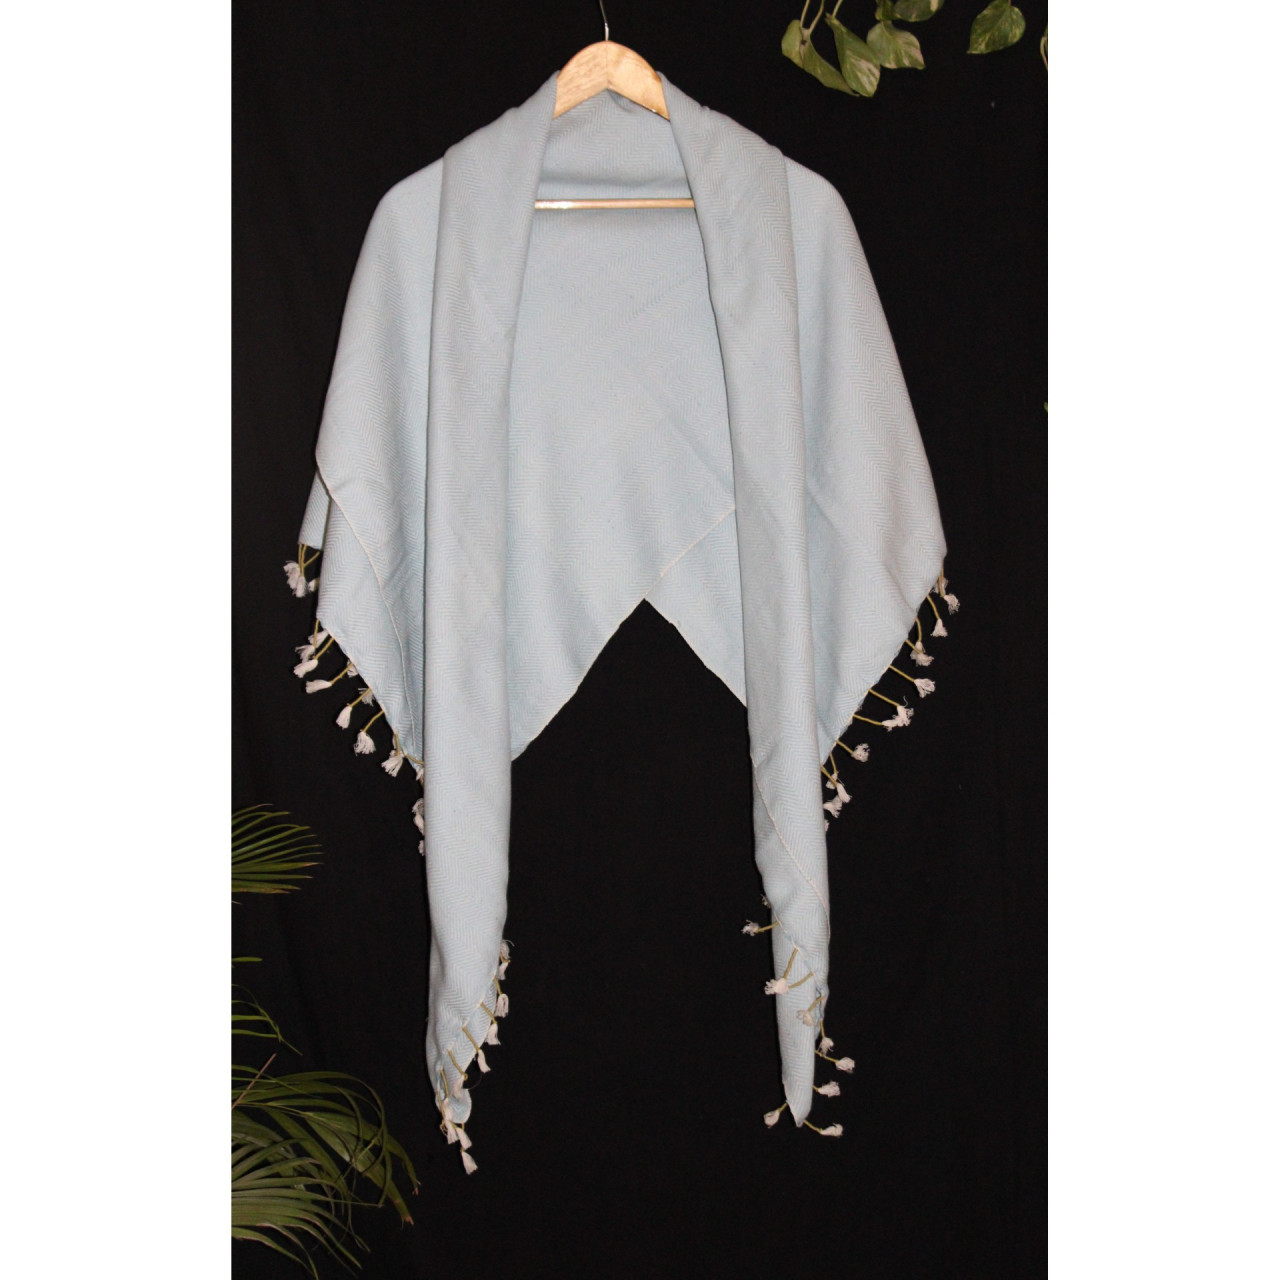 (1439) Cotton and khadi  Azo-free dyed throw from Bihar - Sky blue, piped fringes, textured, white